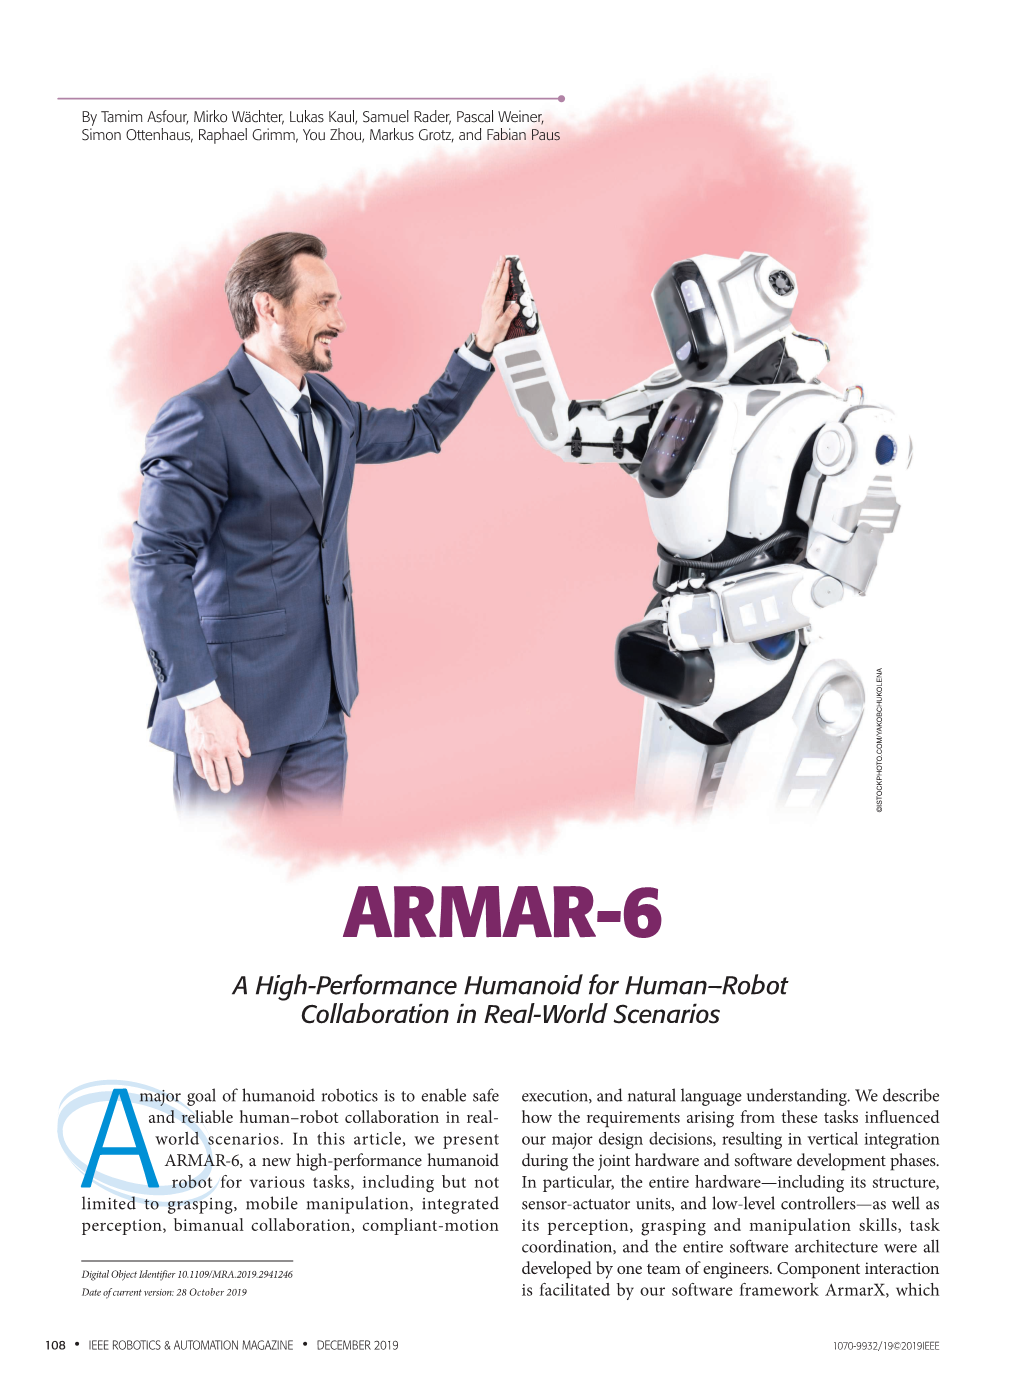 ARMAR-6: a High-Performance Humanoid for Human-Robot Collaboration in Real-World Scenarios